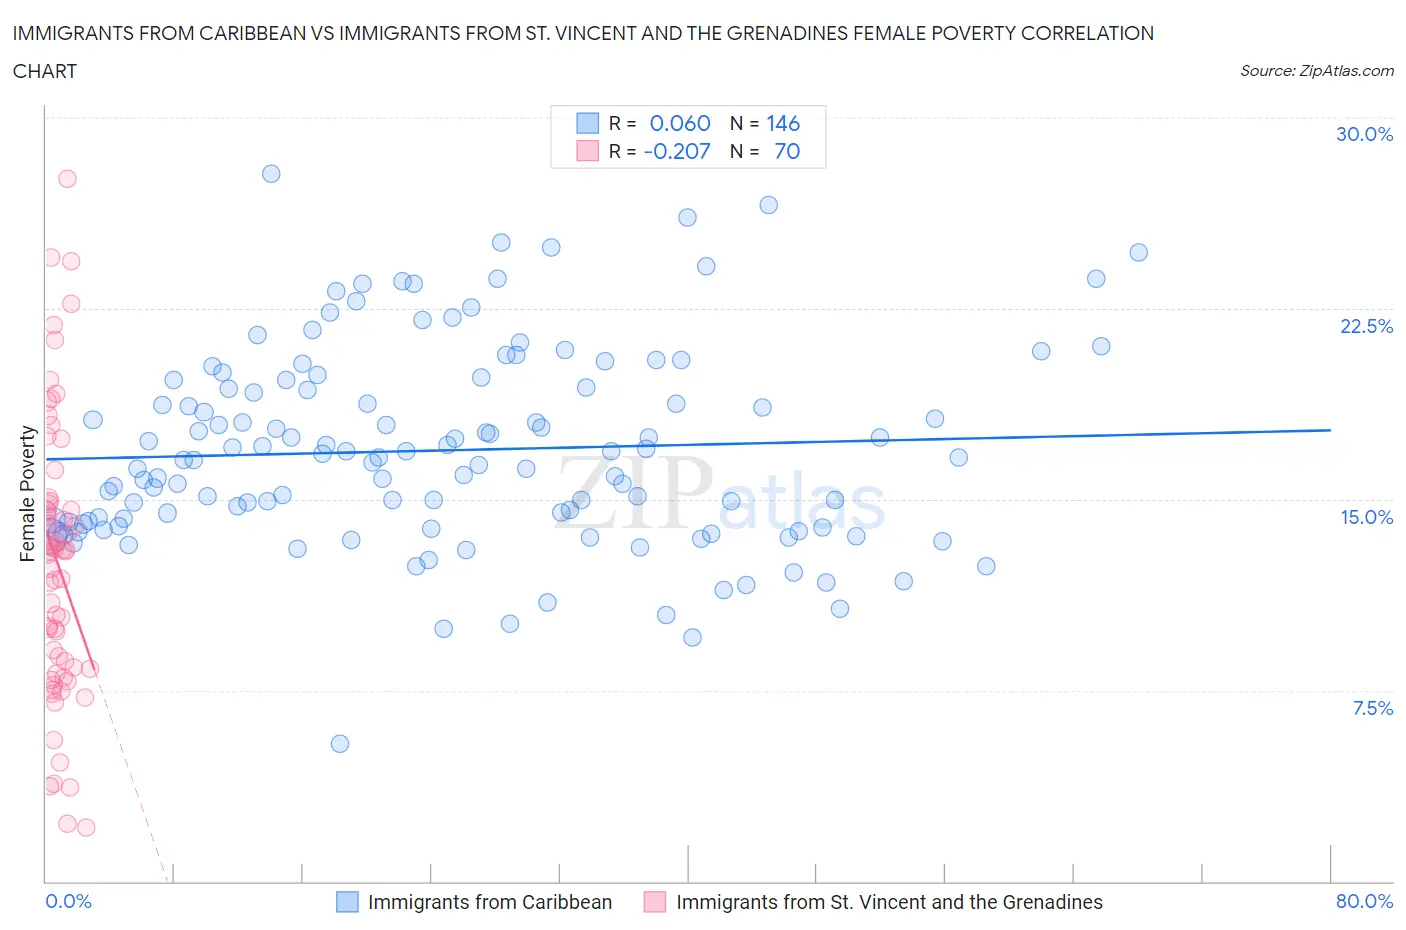 Immigrants from Caribbean vs Immigrants from St. Vincent and the Grenadines Female Poverty